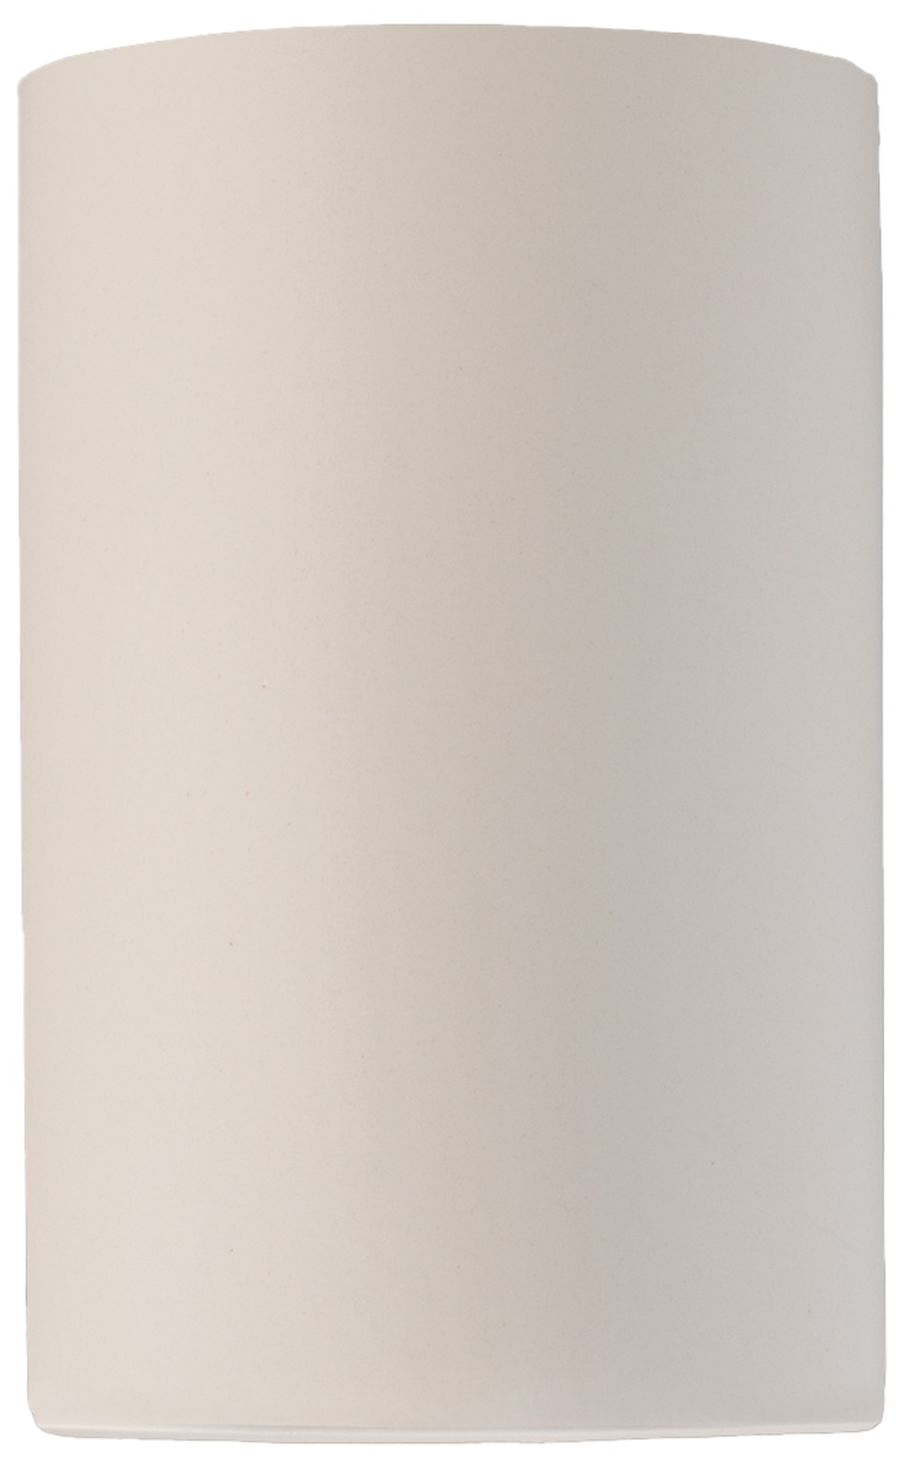 Ambiance Cylinder 7.75" Matte White Closed Top & Bottom Outdoor Wa